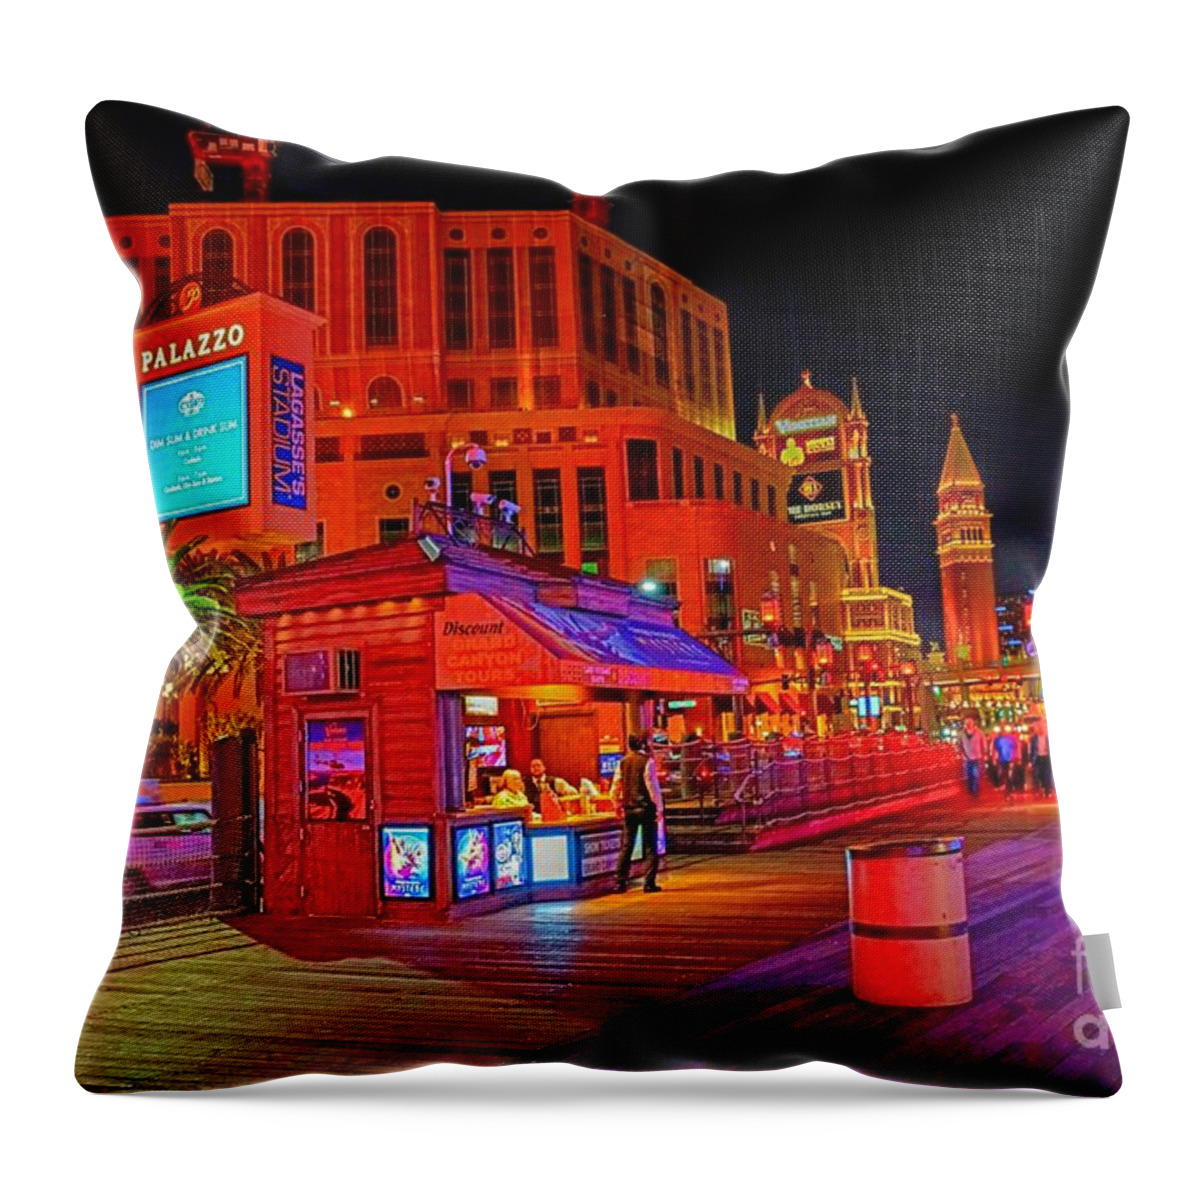  Throw Pillow featuring the photograph Take a Tour by Rodney Lee Williams